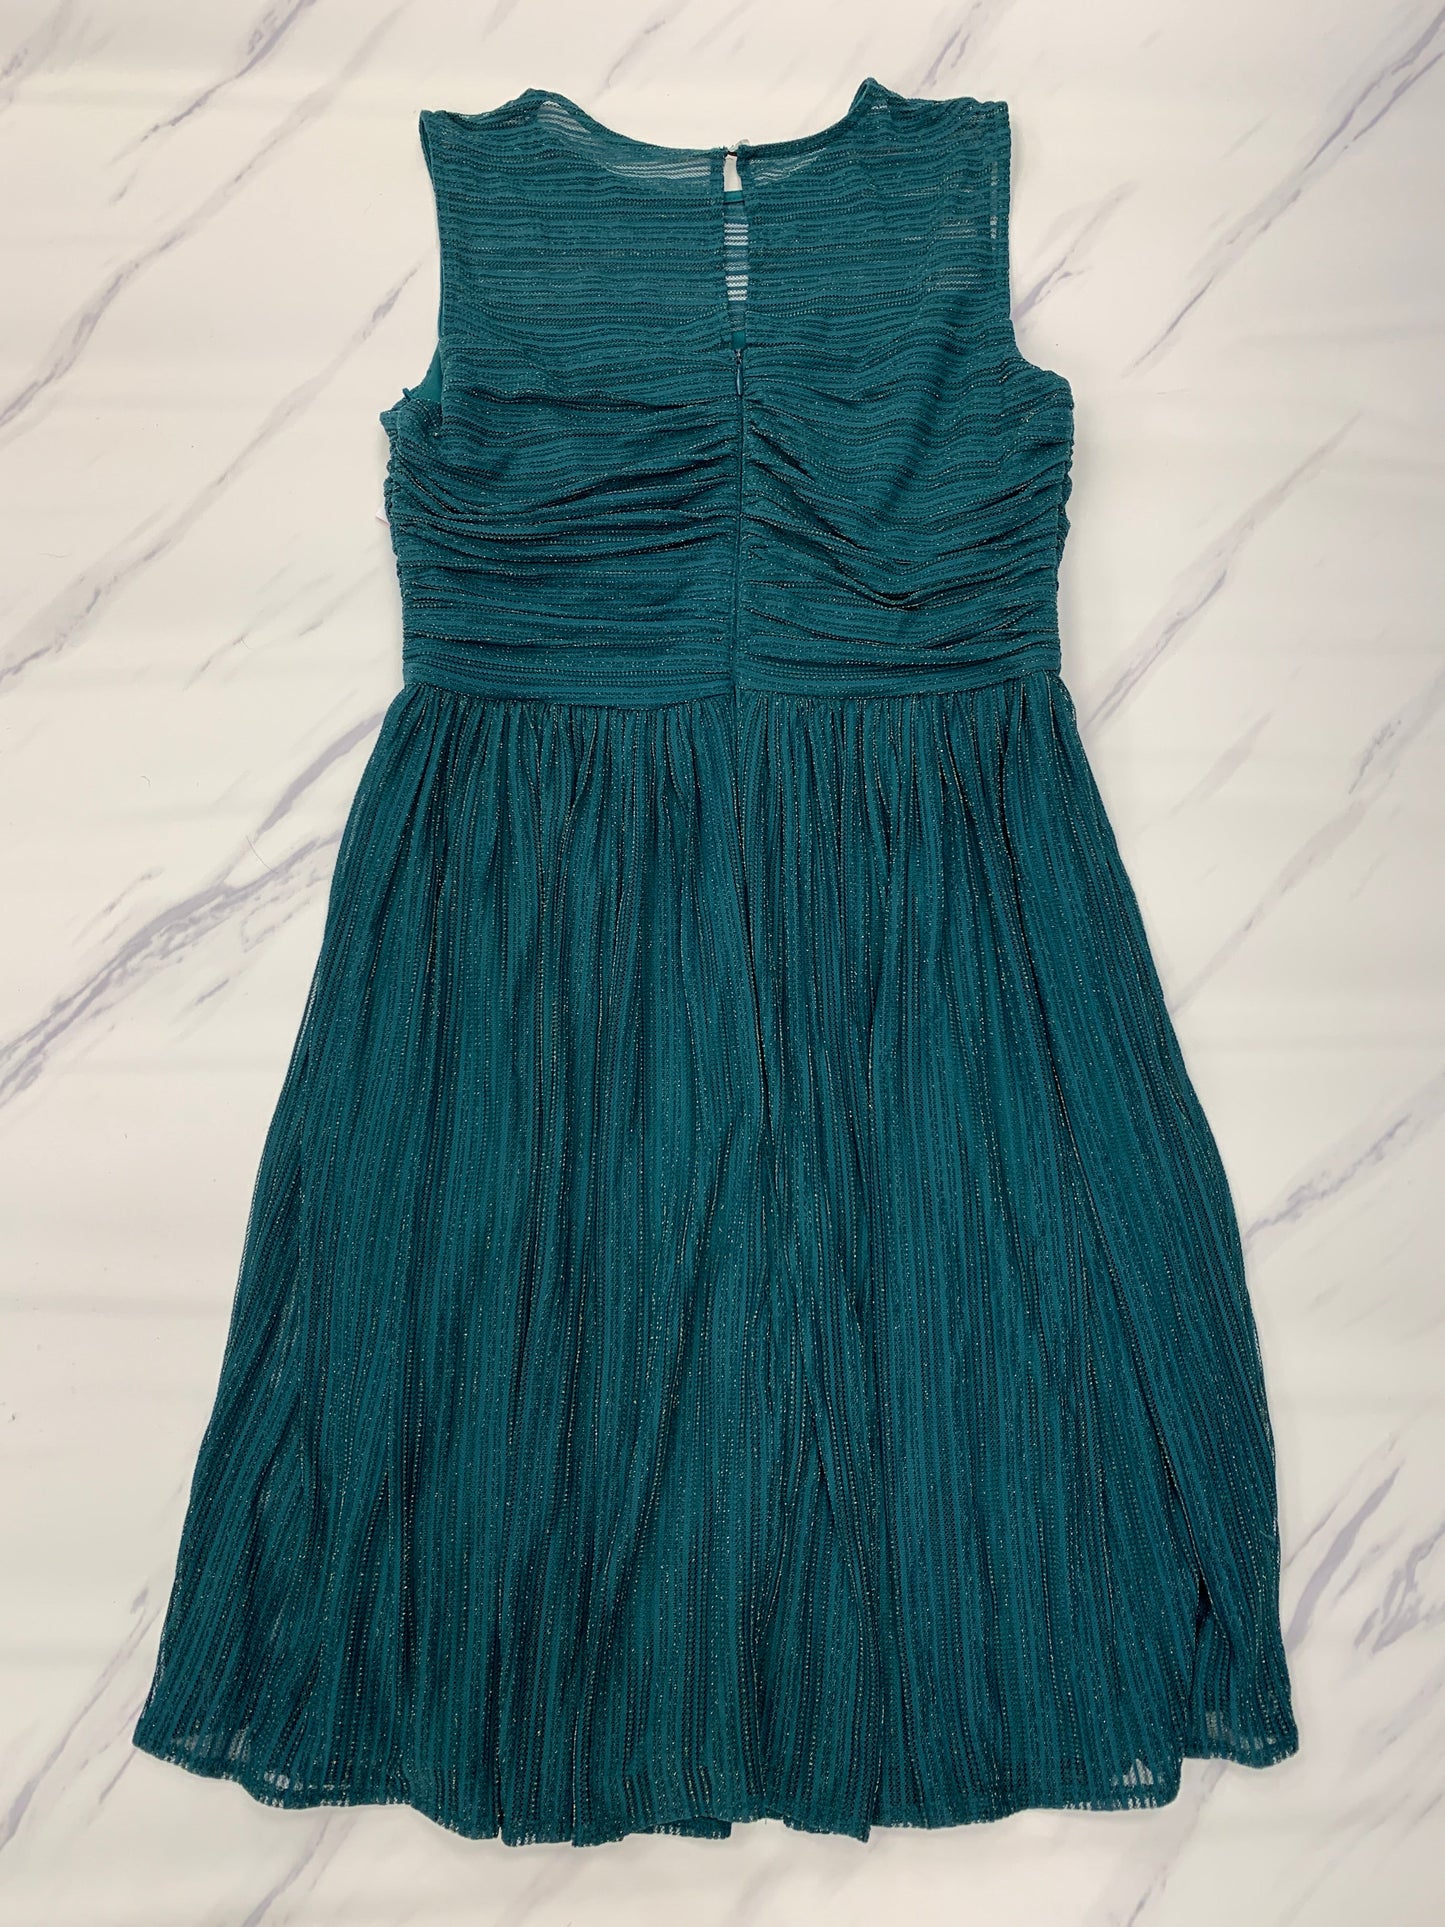 Green Dress Party Midi Maggy London, Size 6